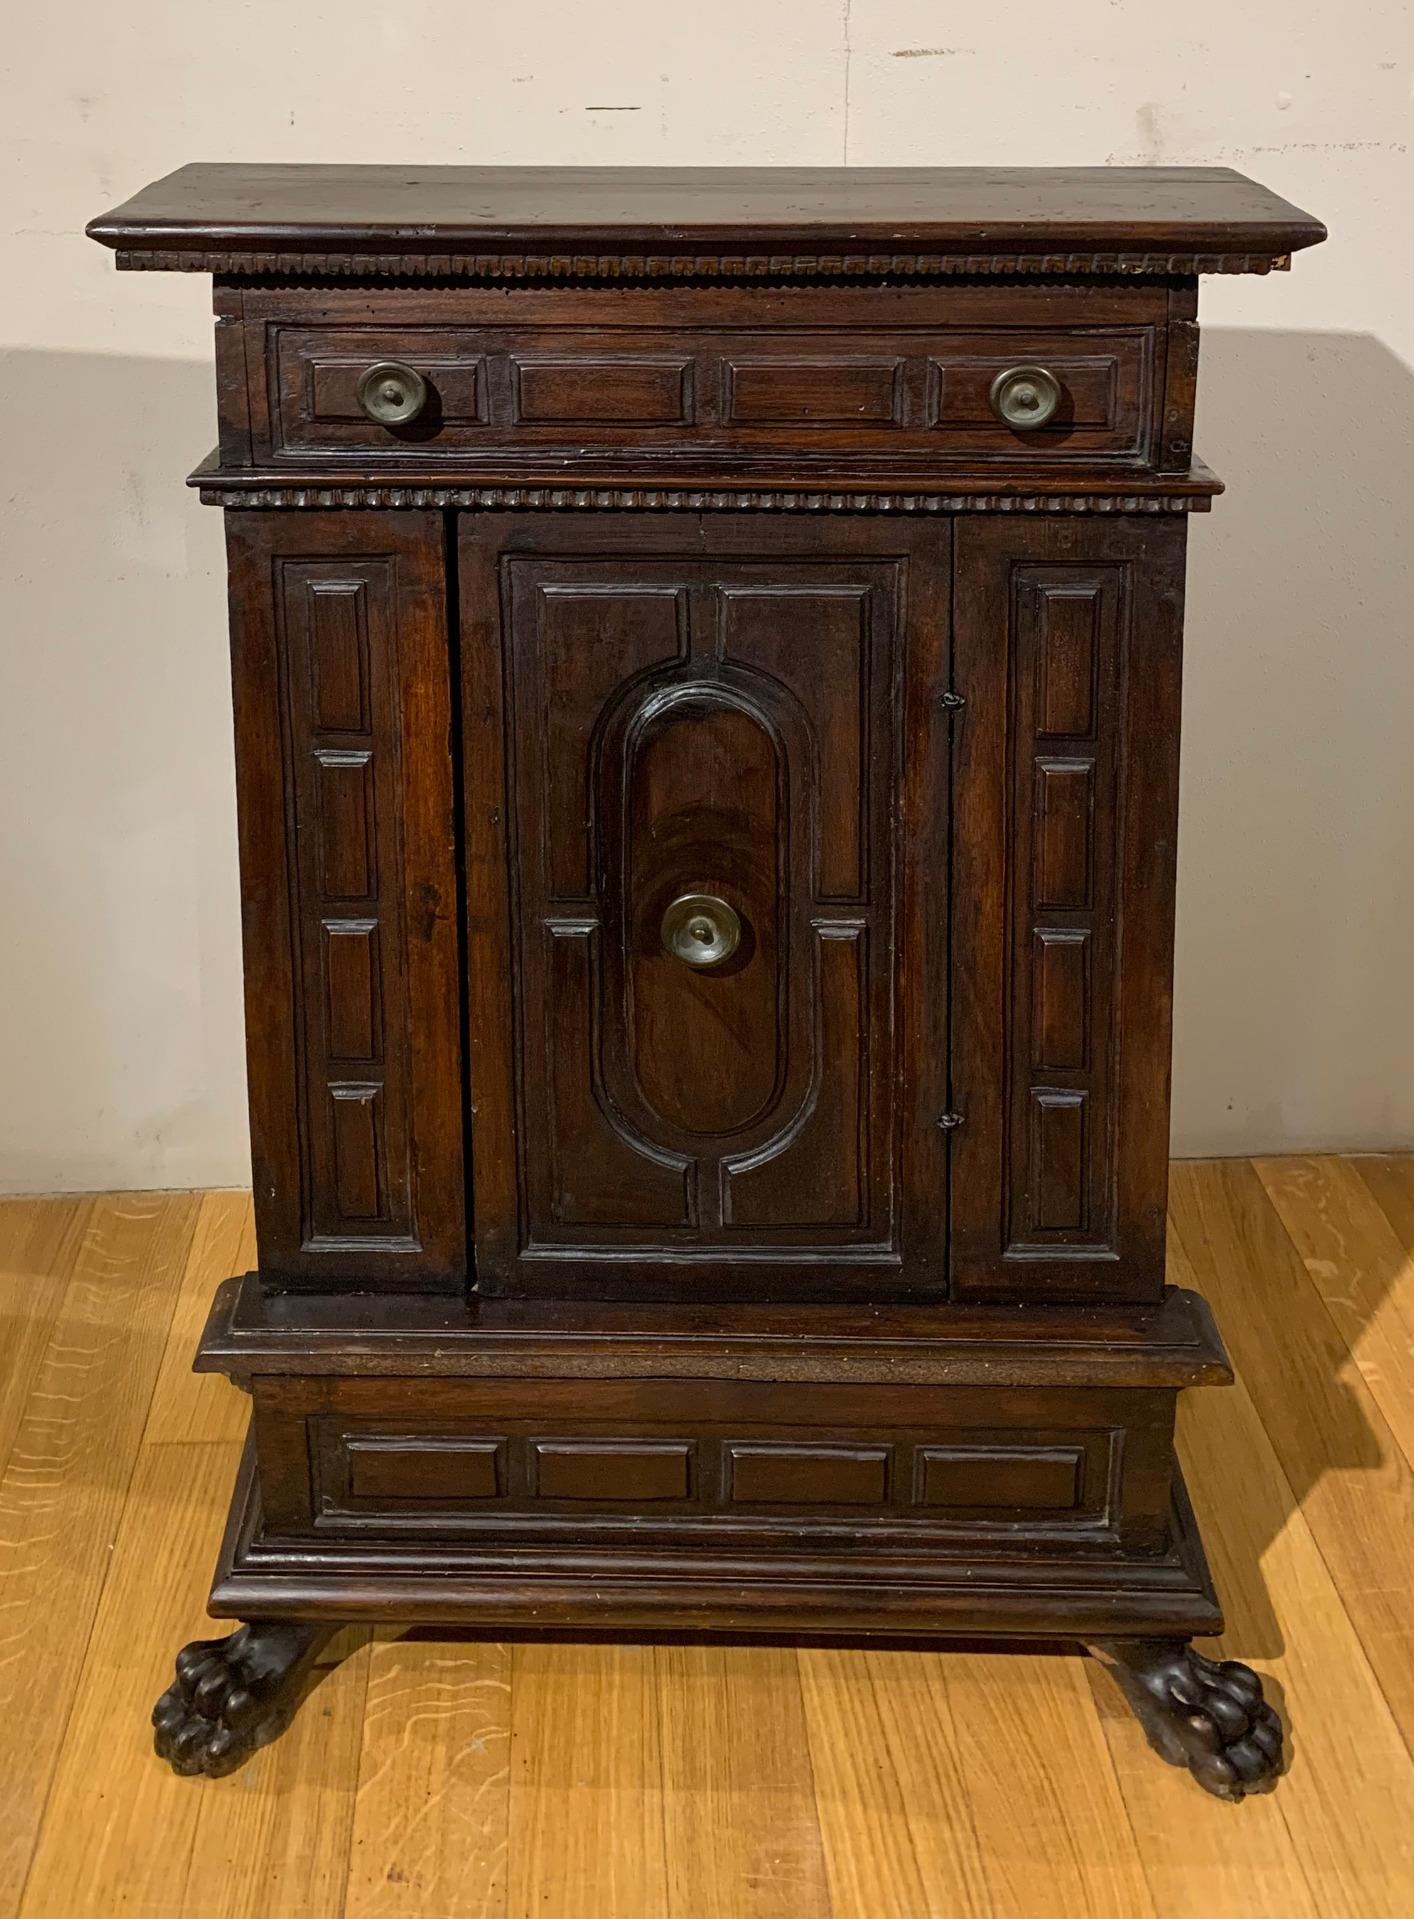 Nice sideboard in solid walnut with ashlar paneling with geometric patterns and dark patina. It has a door in the central part with a small drawer under the top. The base is refined with 4 finely carved feral legs. The particularity of the piece of